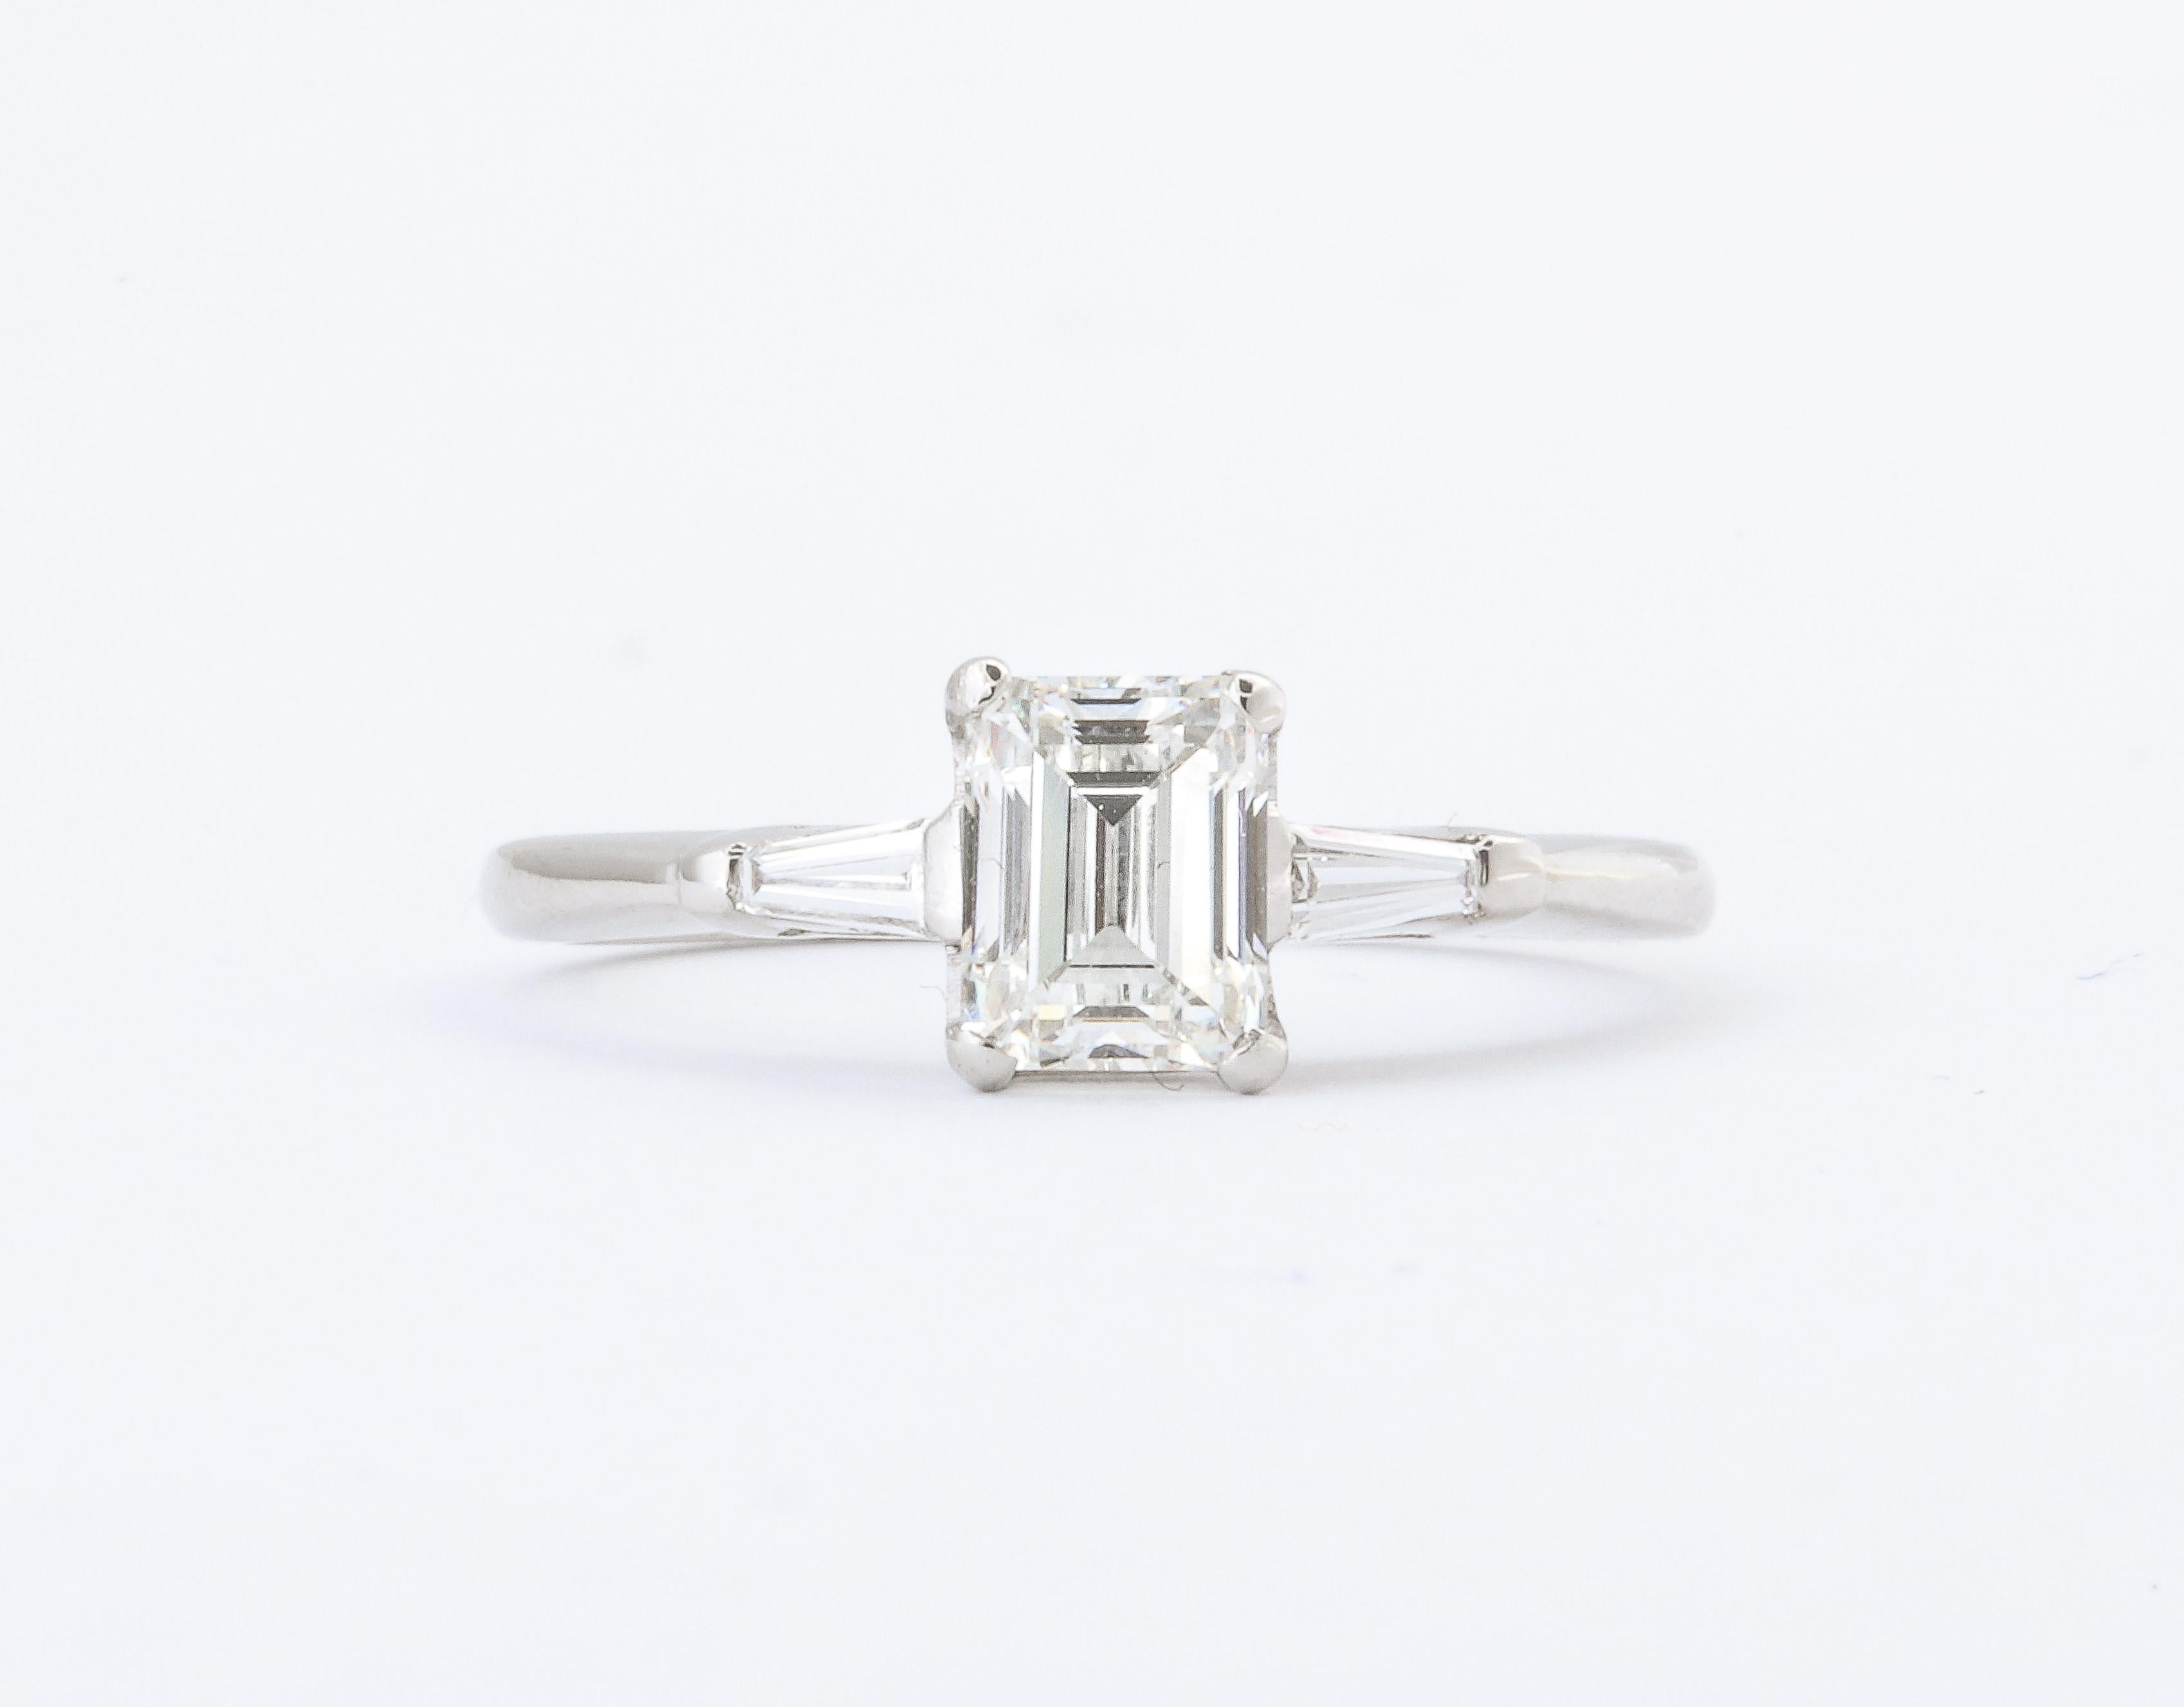 A classic Art Deco Diamond Emerald Cut Engagement Ring 1.07 Ct set in Platinum with a pair of tapered baguette diamonds flanking the center stone. Certificate from EGL Gemological Laboratory : VS1 H, 1.07 Ct
